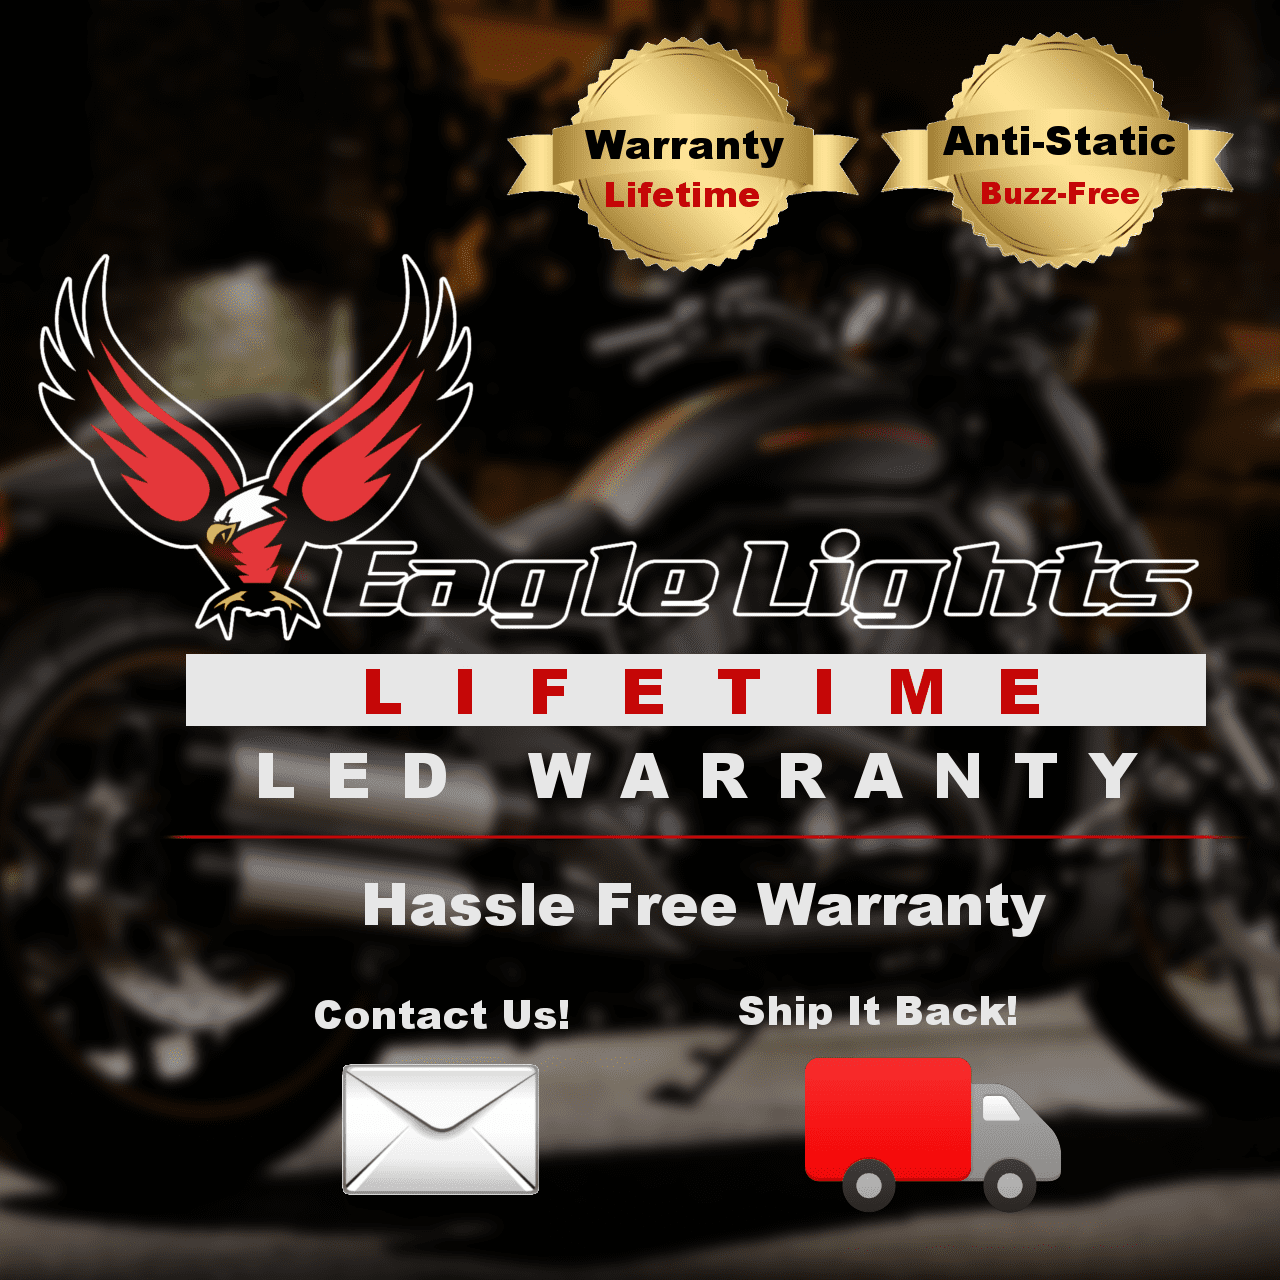 3 ¼” LED Front Turn Signals - Eagle Lights Generation II 3 1/4" Flat Style LED Front Turn Signals For Harleys - Double Pack